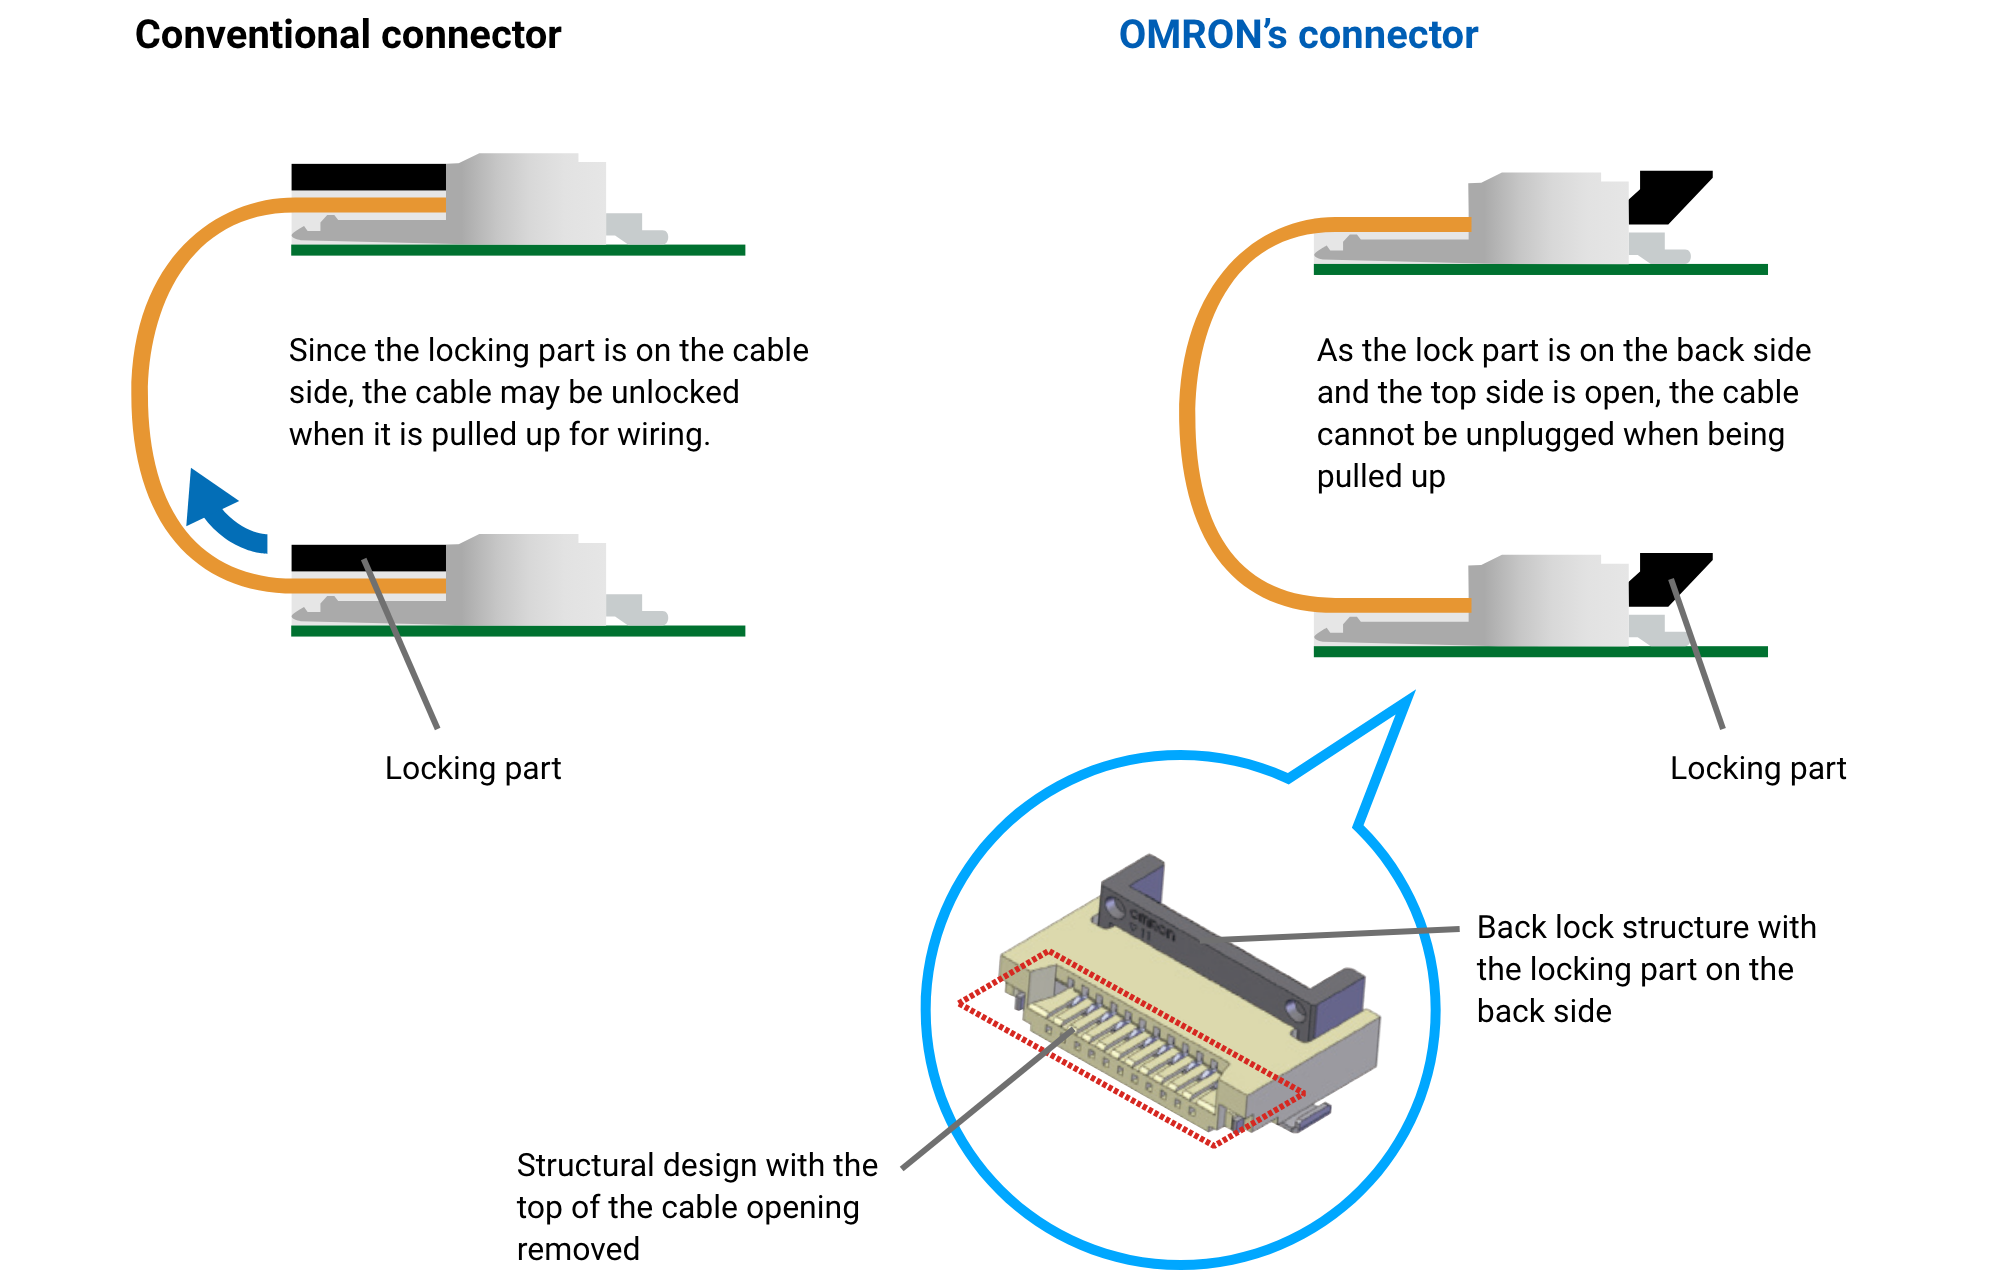 Conventional connector: Since the locking part is on the cable side, the cable may be unlocked when it is pulled up for wiring. OMRON's connector: As the lock part is on the back side and the top side is open, the cable cannot be unplugged when being pulled up (Structural design with the top of the cable opening removed, Back lock structure with the locking part on the back side)